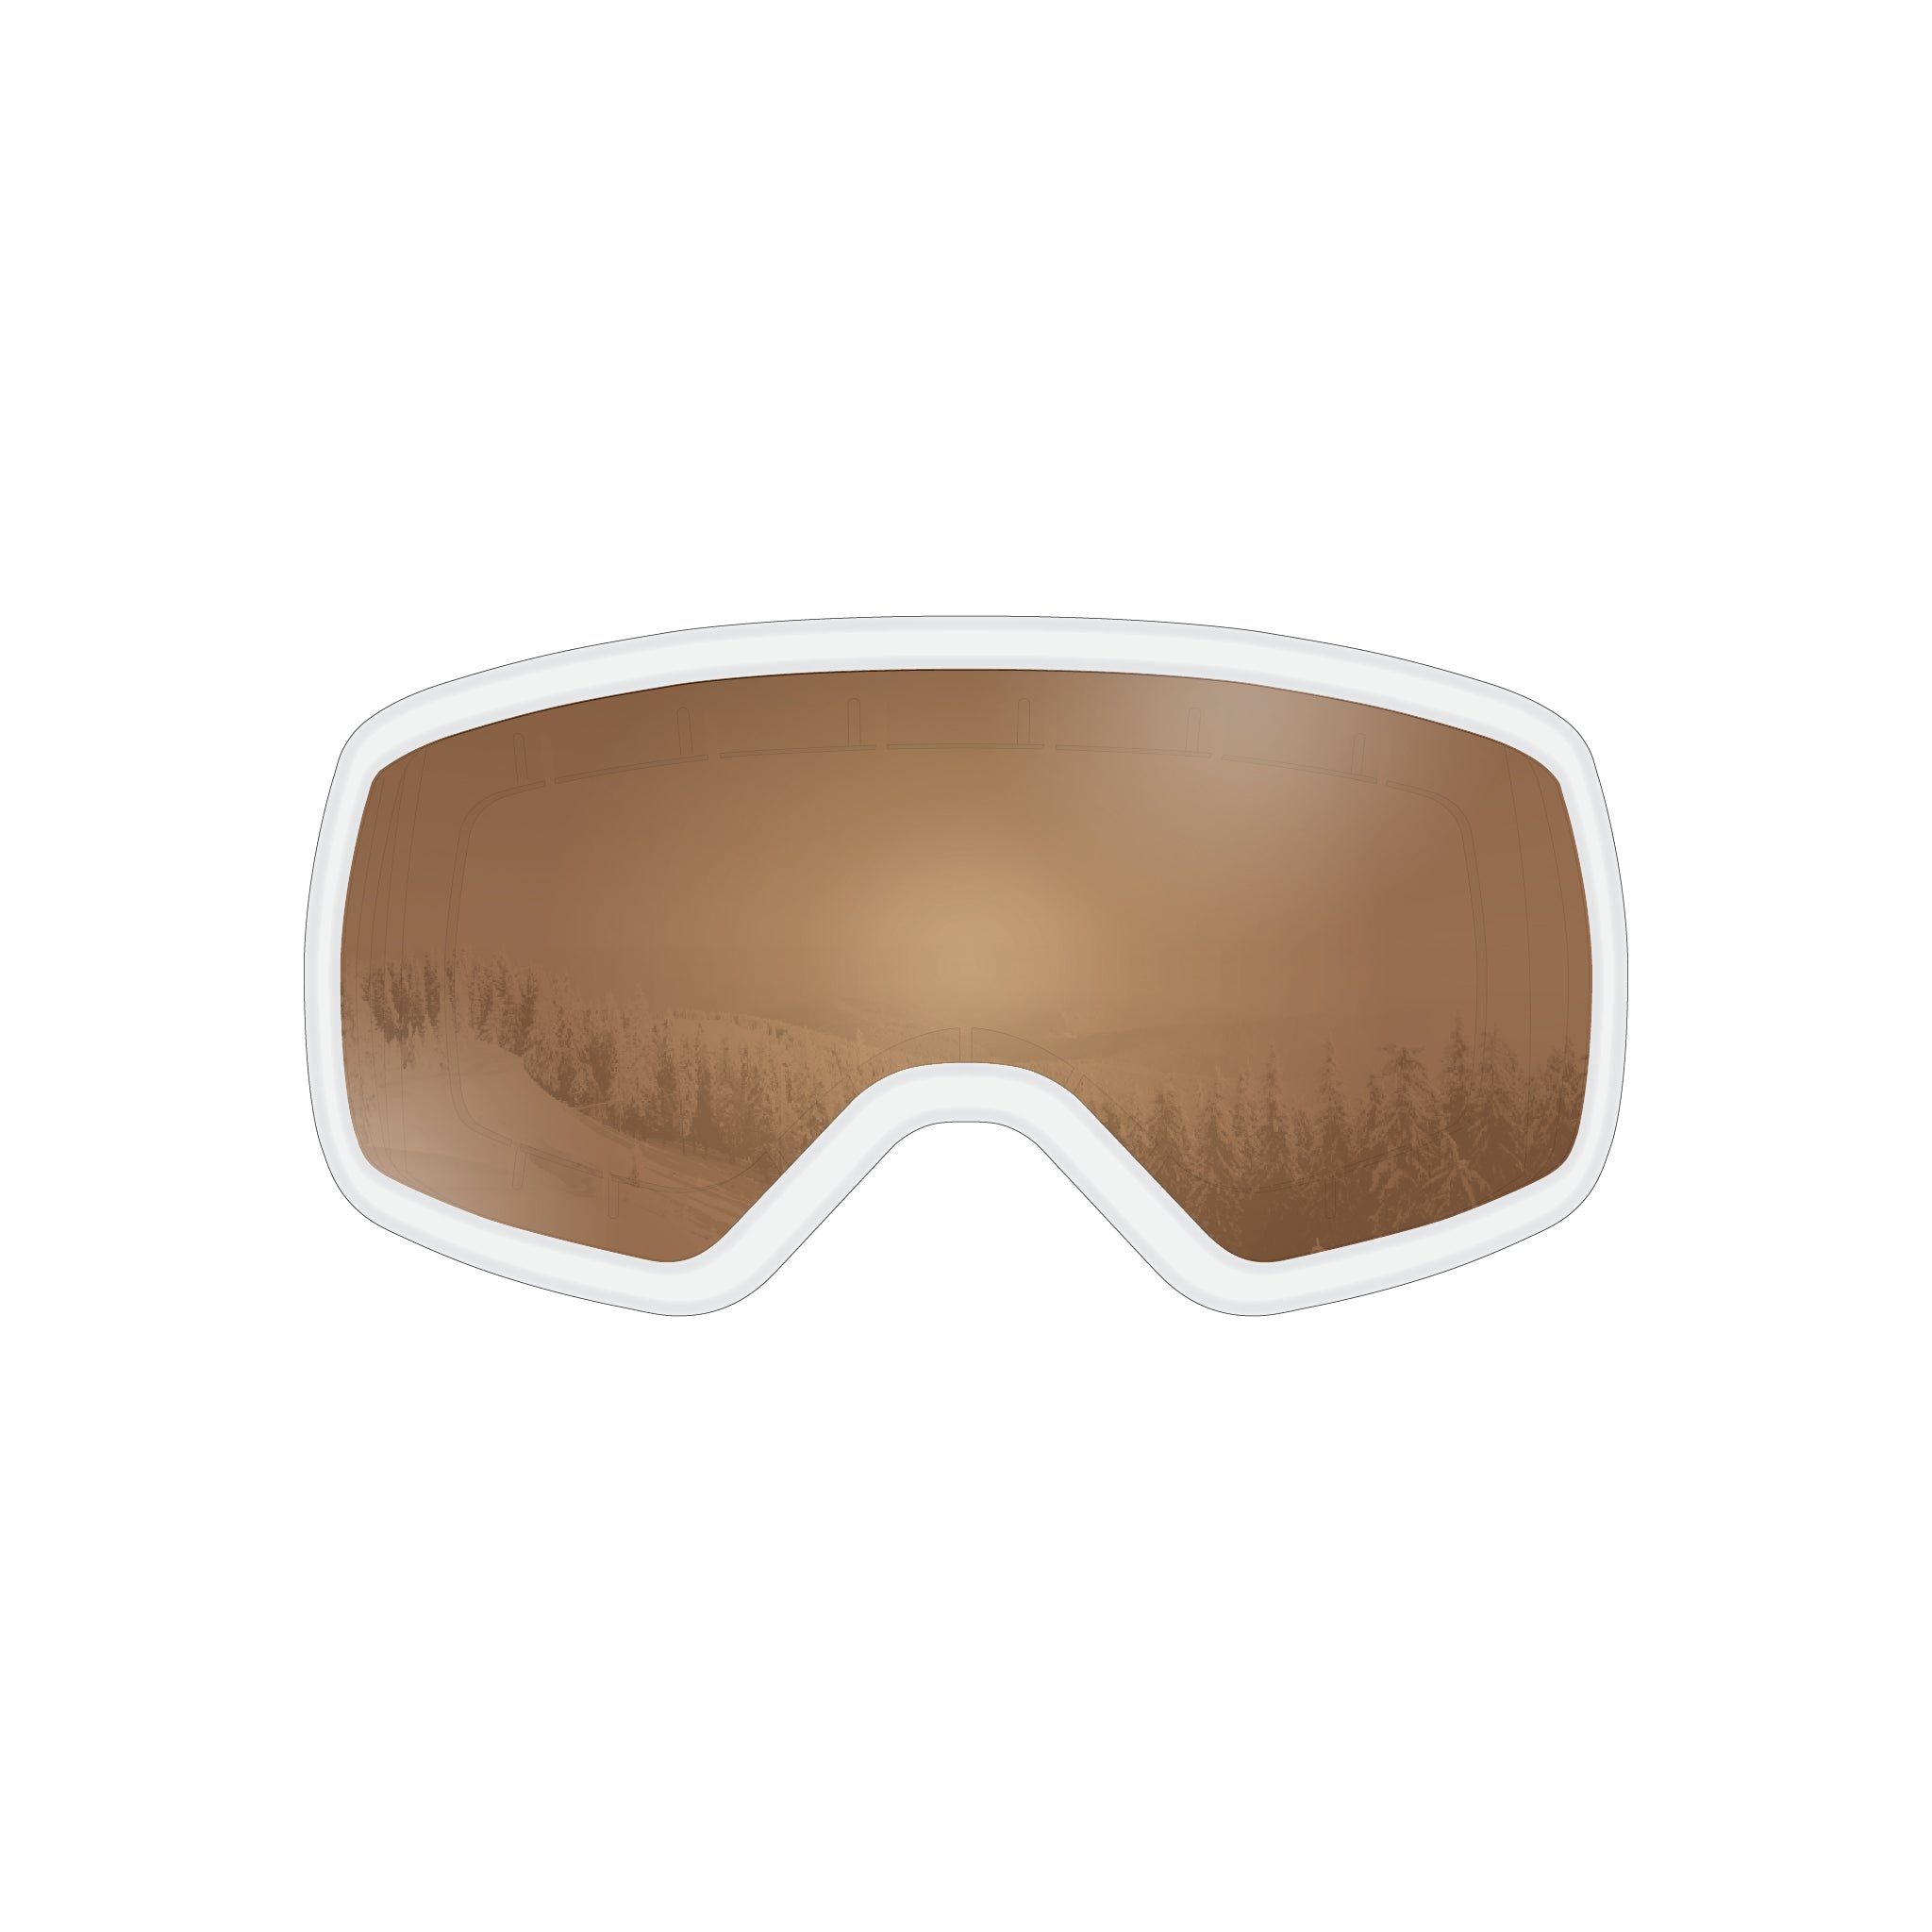 STAGE 8Track Ski Goggle w/ Gold Revo Lens and White Frame - Fits teens, ages 9 -13. Youth ski goggle.